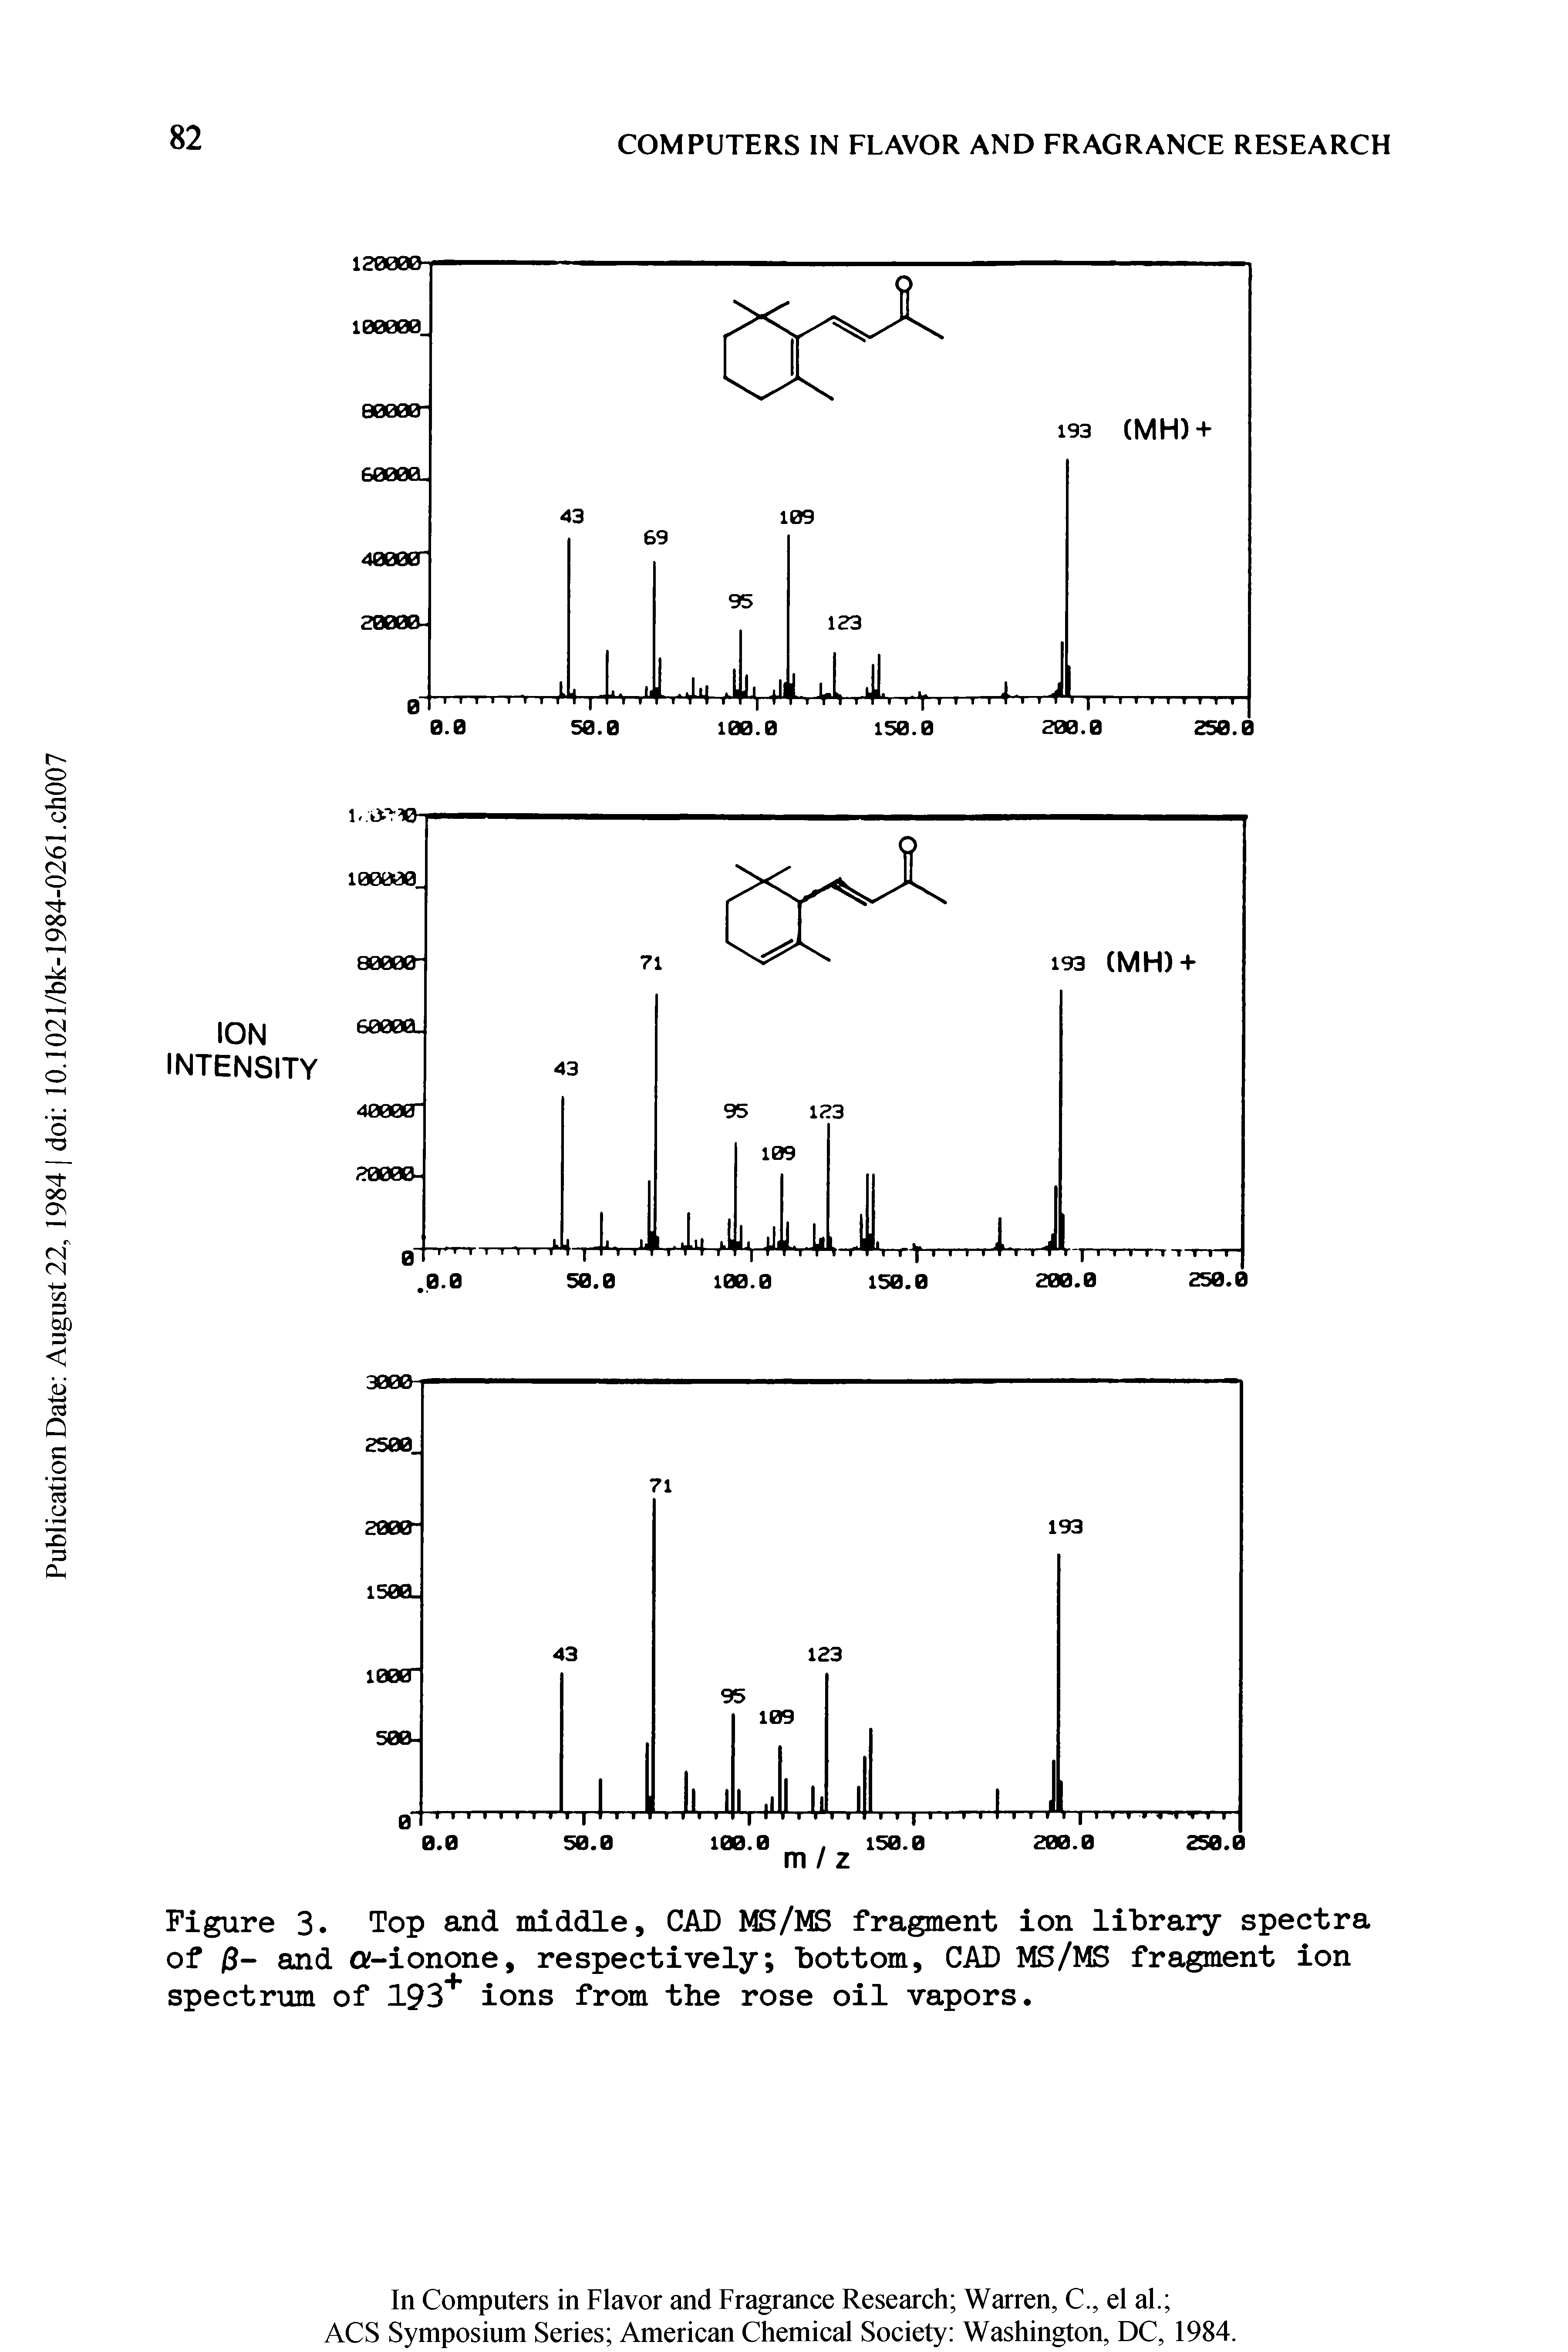 Figure 3. Top and middle, CAD MS/MS fragment ion library spectra of 0- and Qf-ionone, respectively bottom, CAD MS/MS fragment ion...